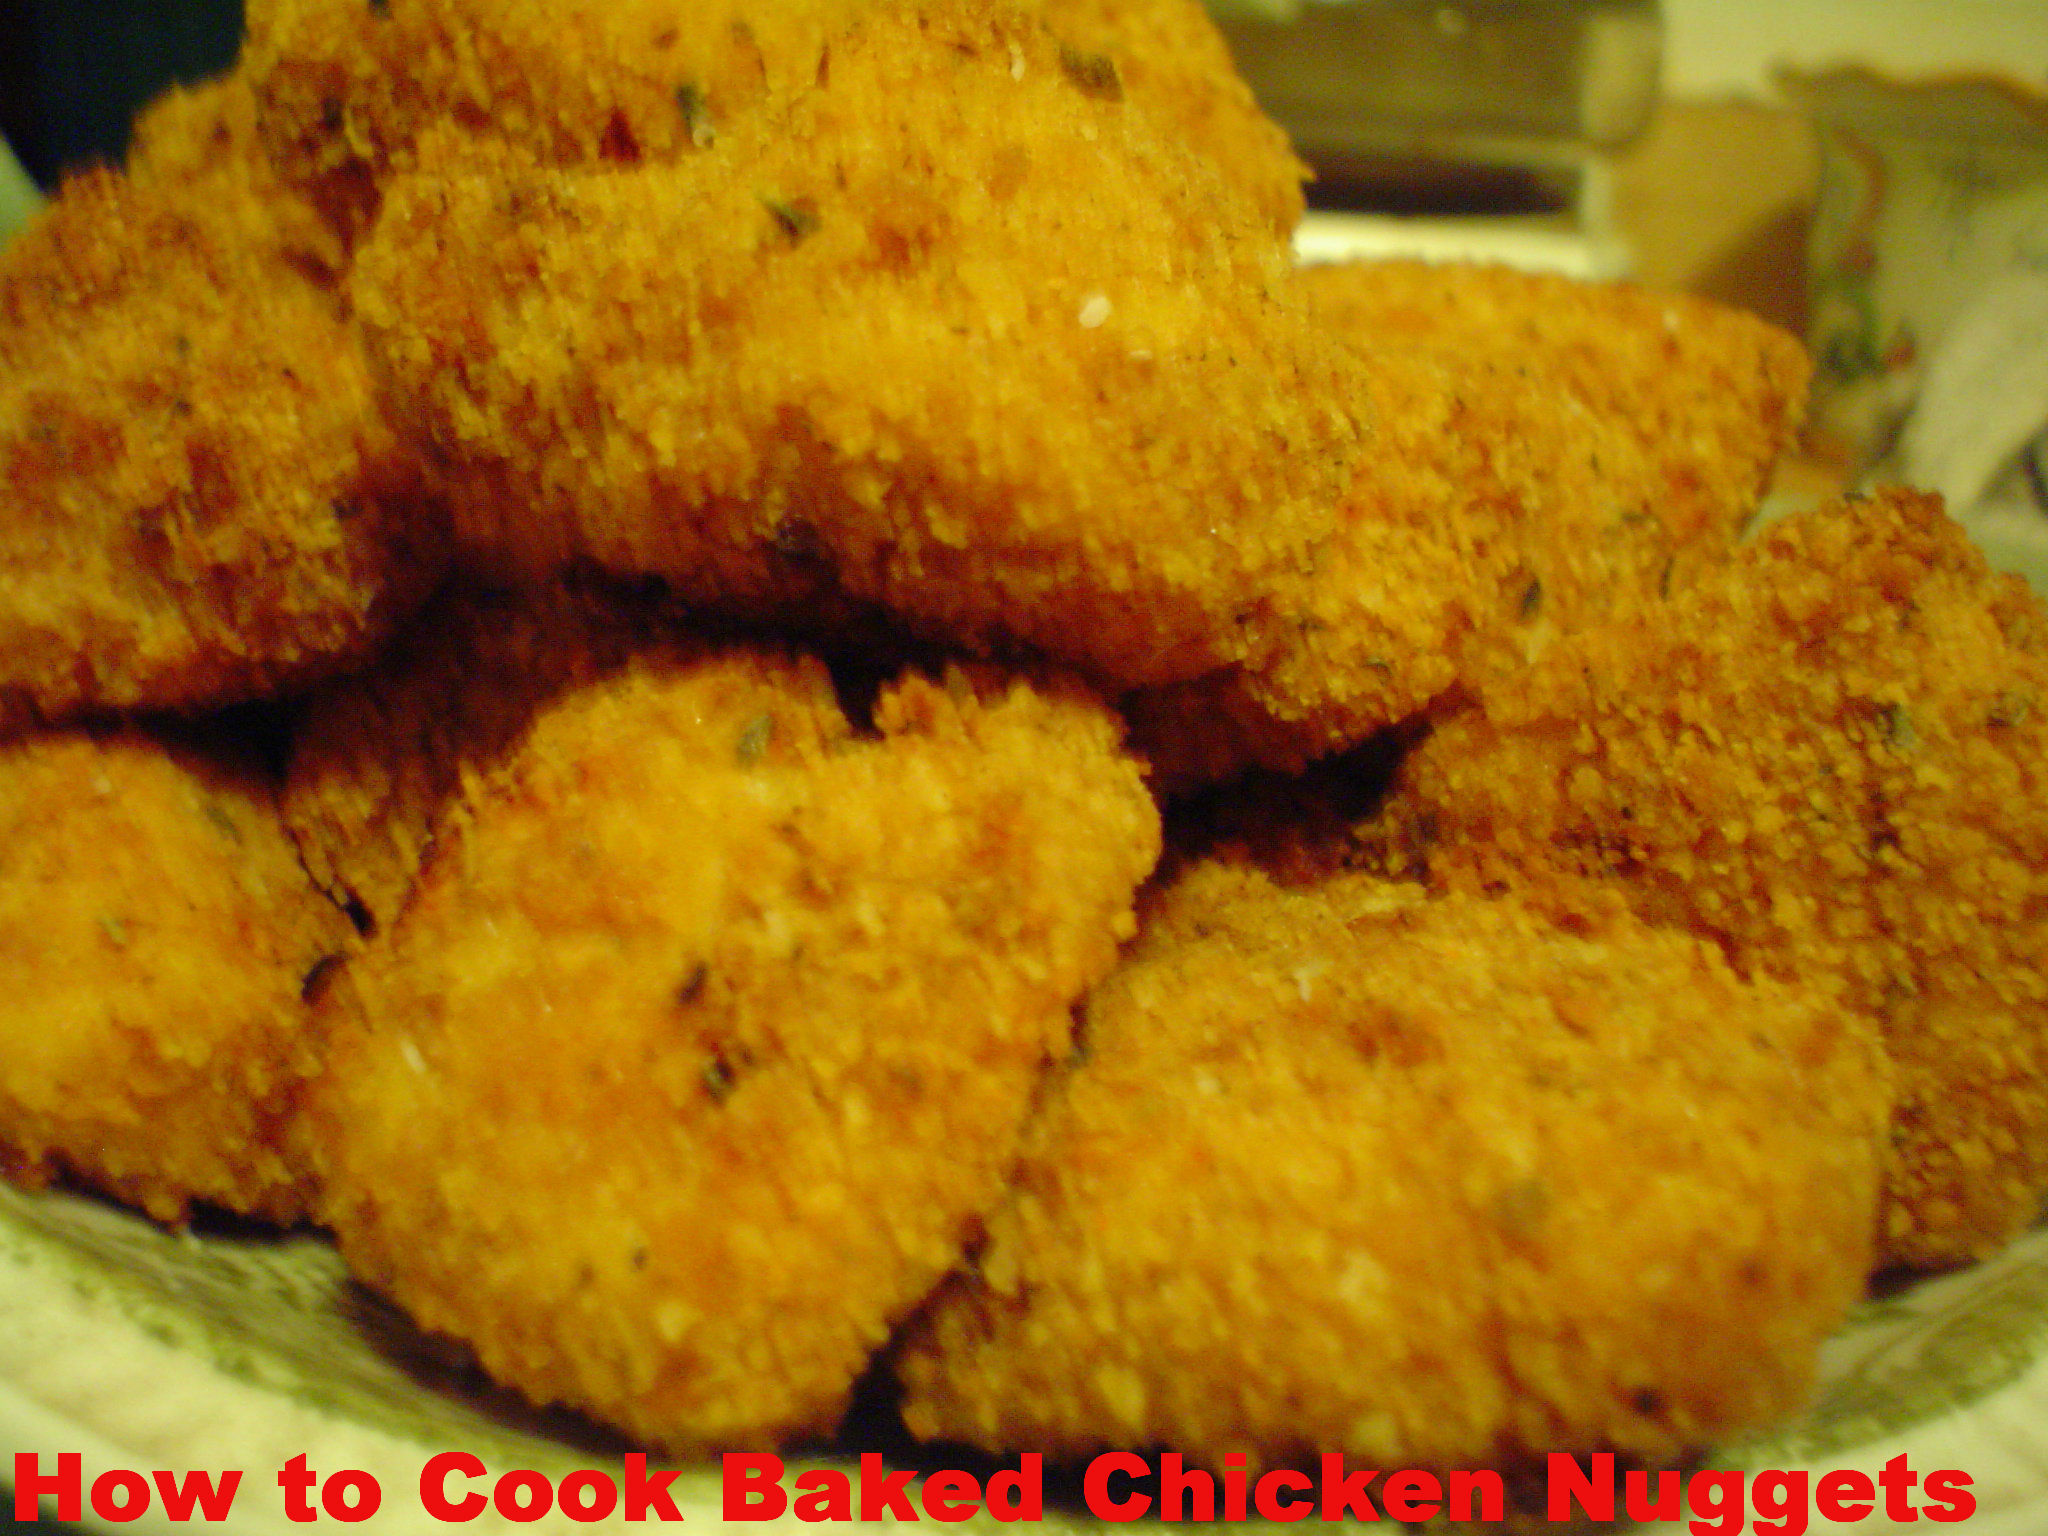 How to Cook Baked Chicken Nuggets